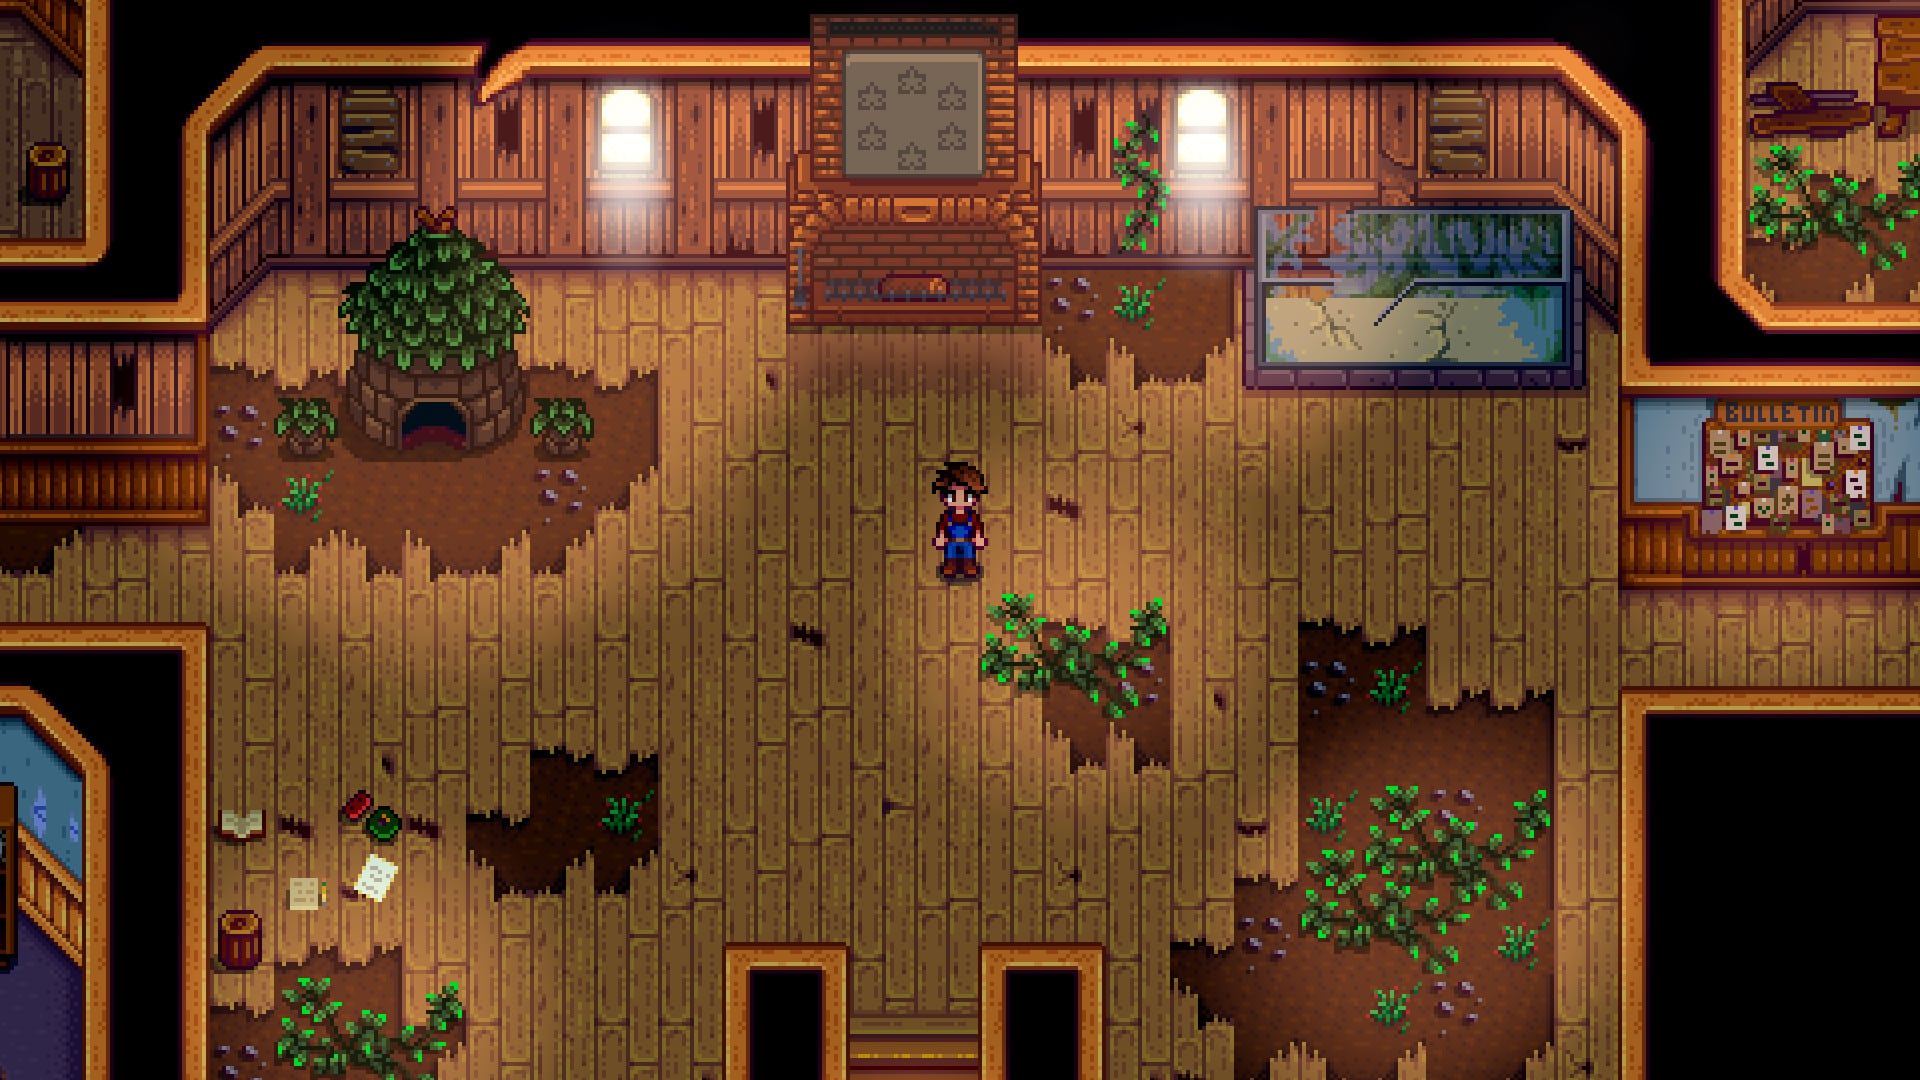 How To Marry Another Player In Stardew Valley